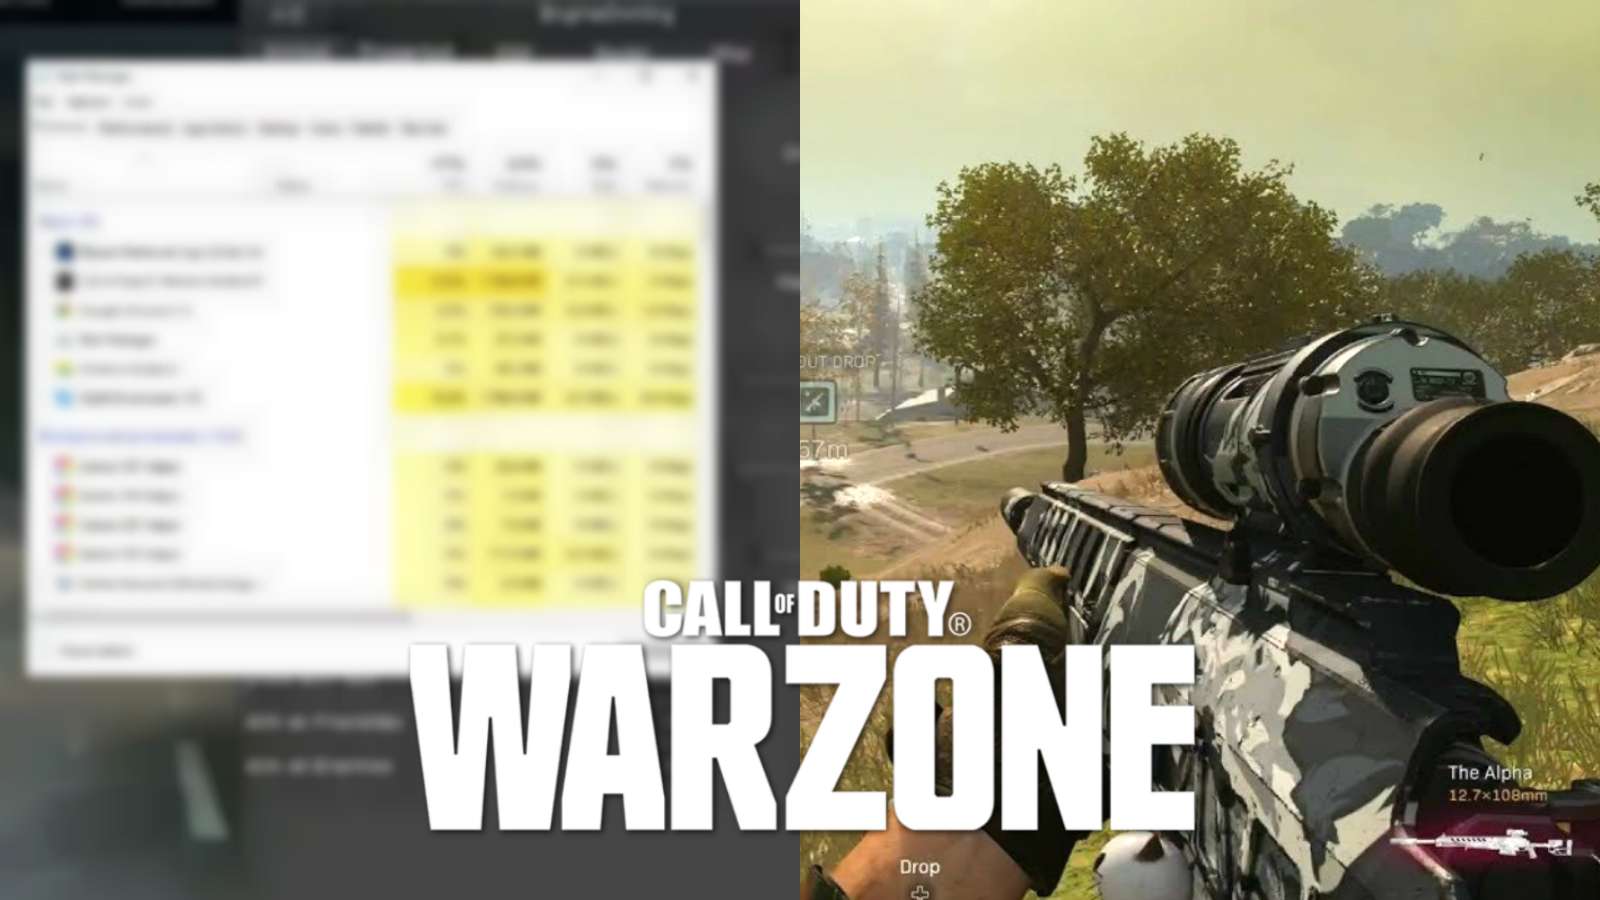 Task manager screen and warzone gameplay with warzone logo